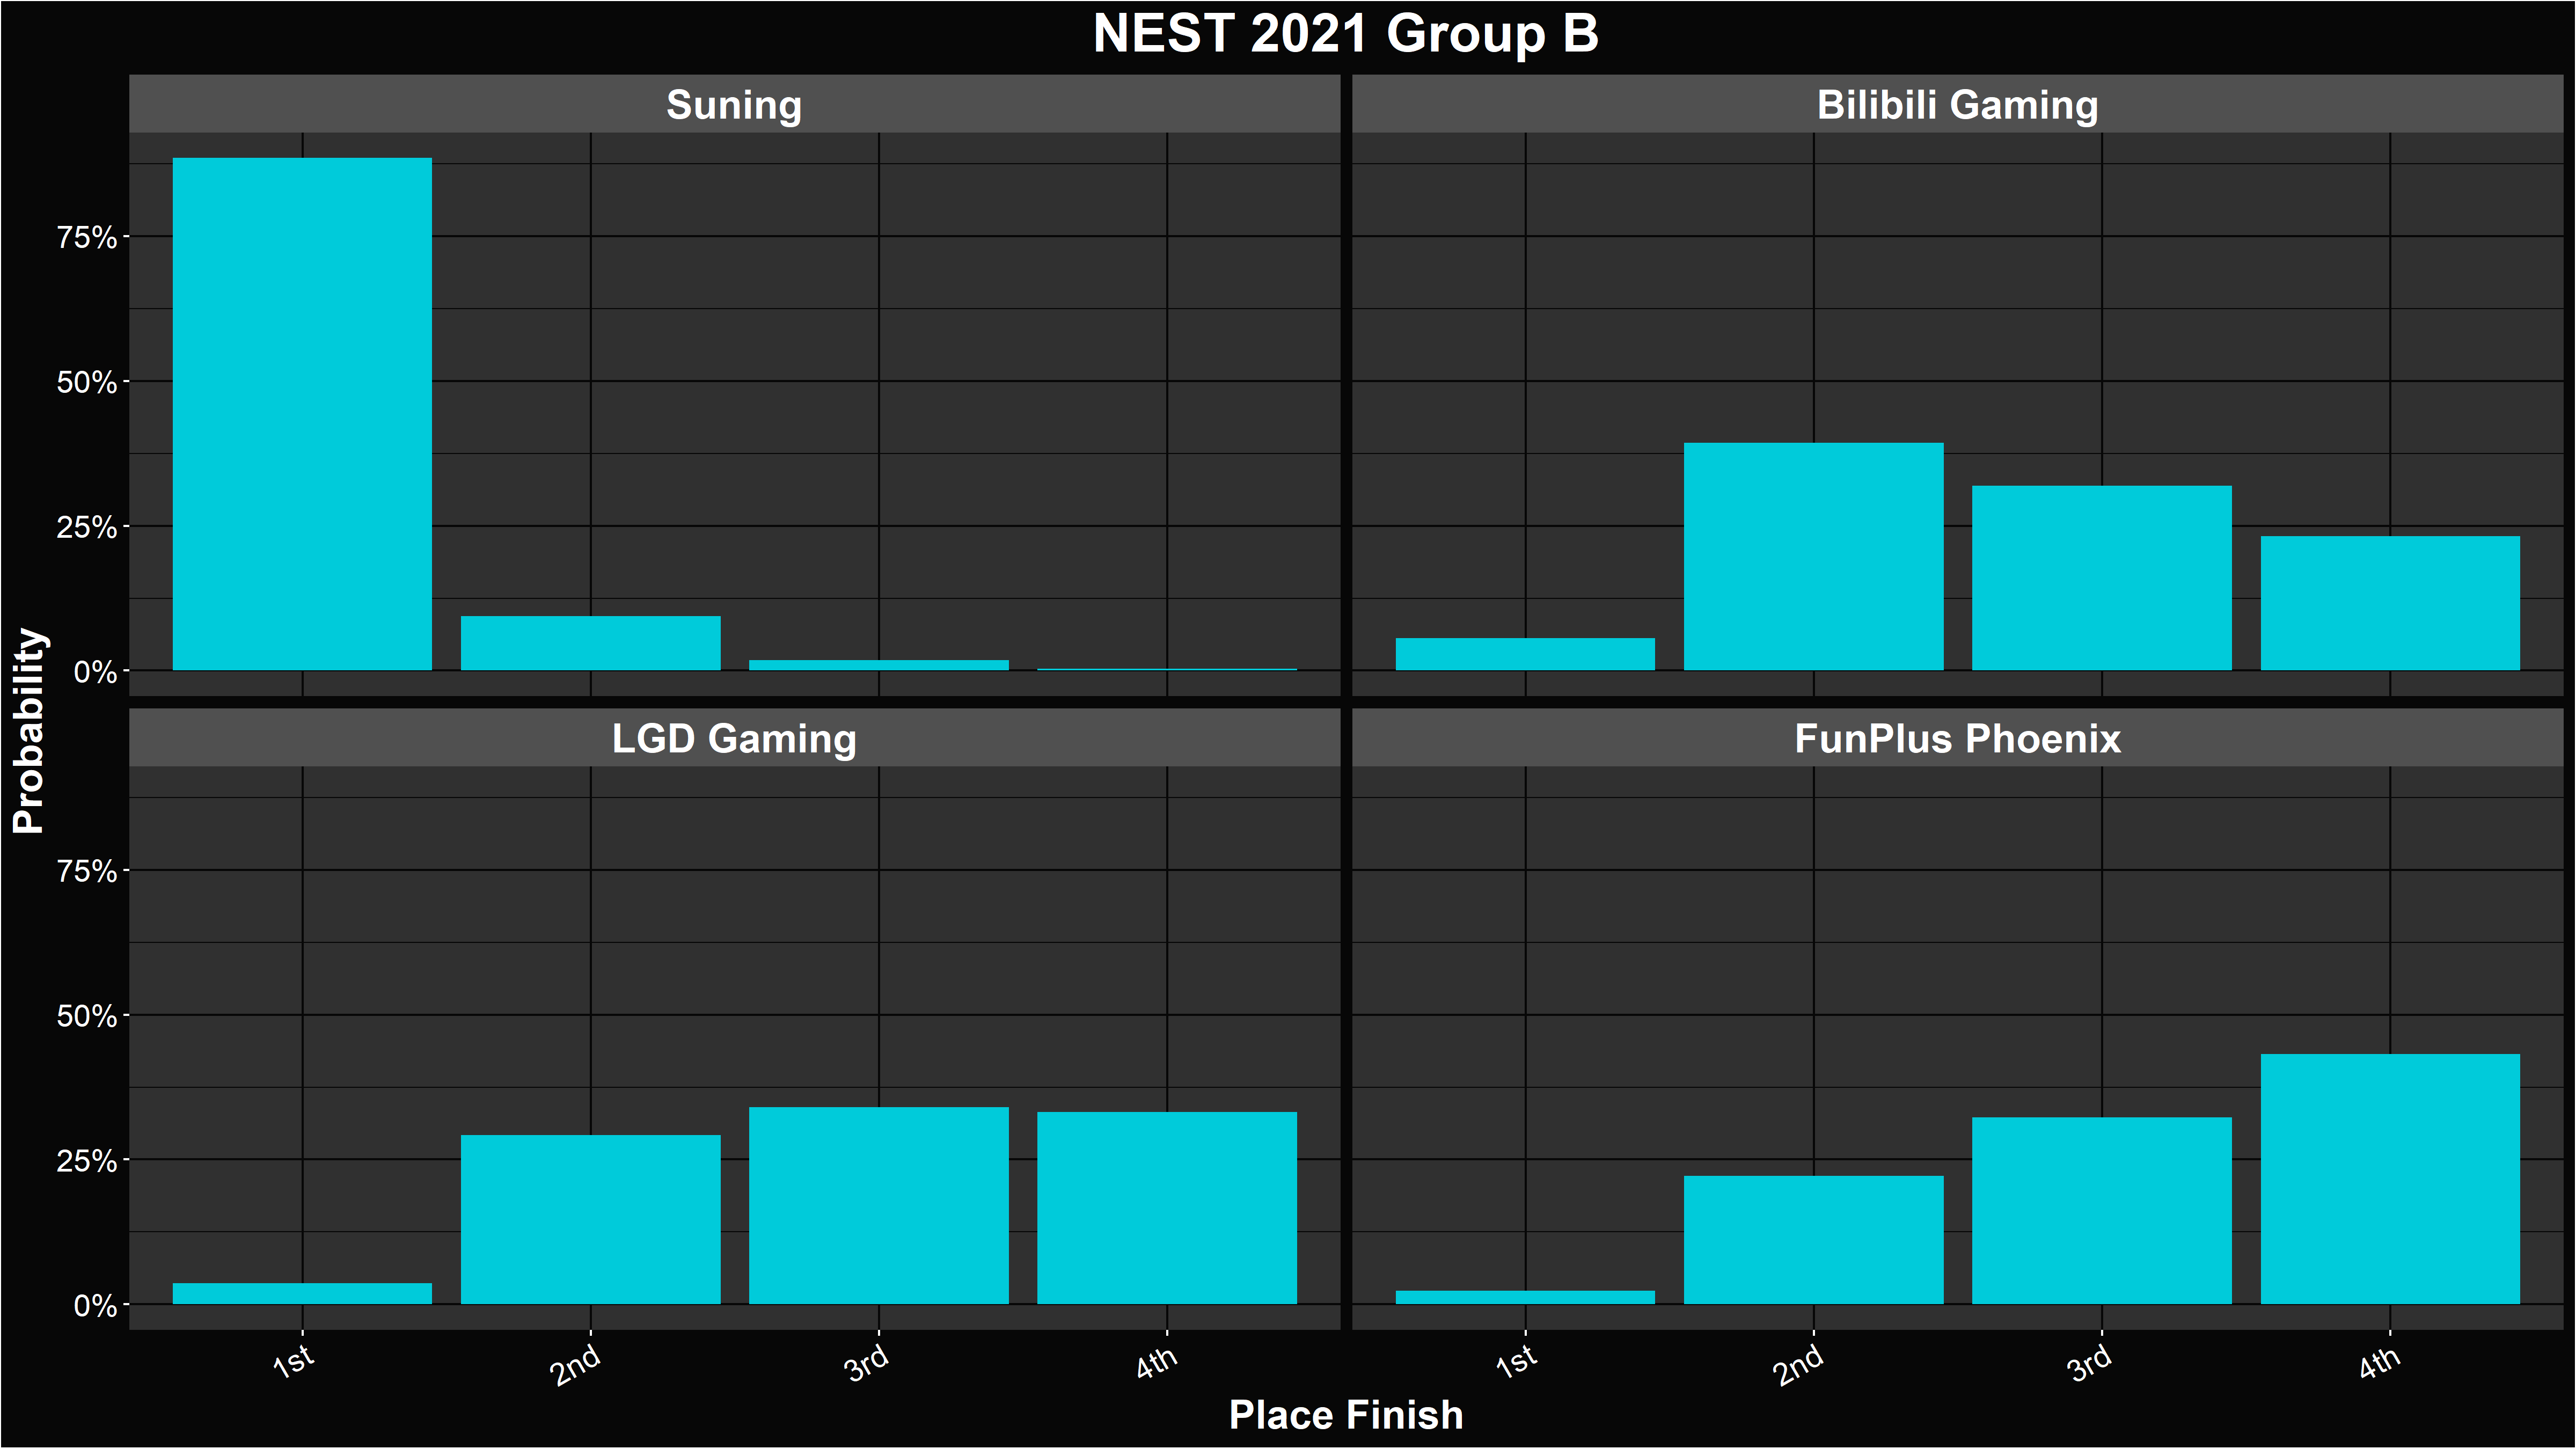 Alacrity's NEST 2021 Group B Placement Distributions